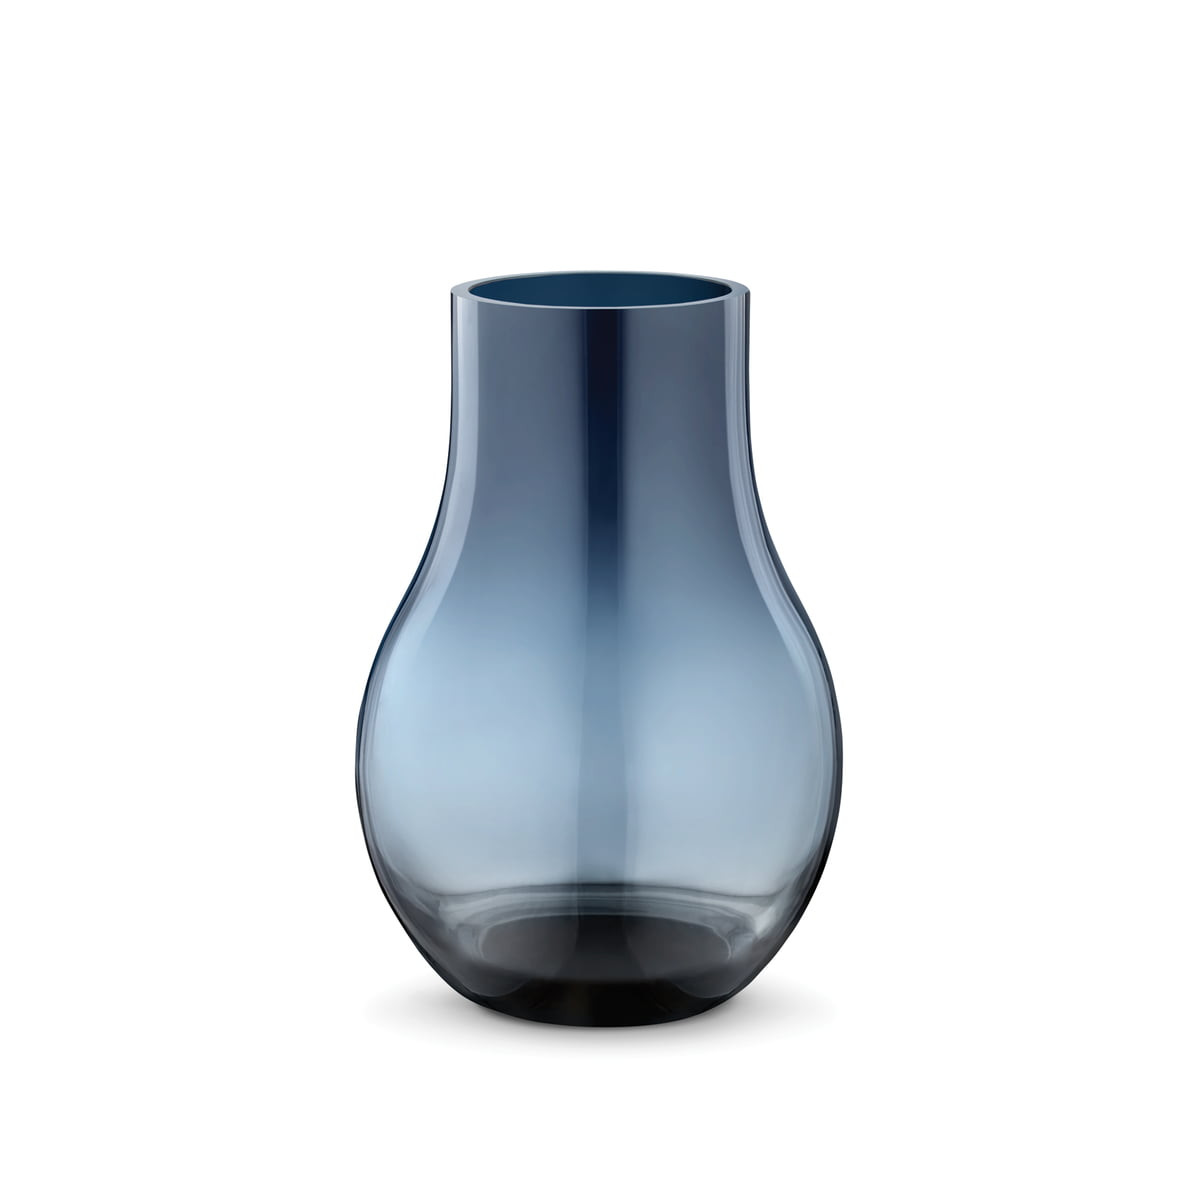 21 Lovable George Jensen Vase 2024 free download george jensen vase of the cafu vase out of glass by georg jensen with regard to georg jensen cafu vase glass in s